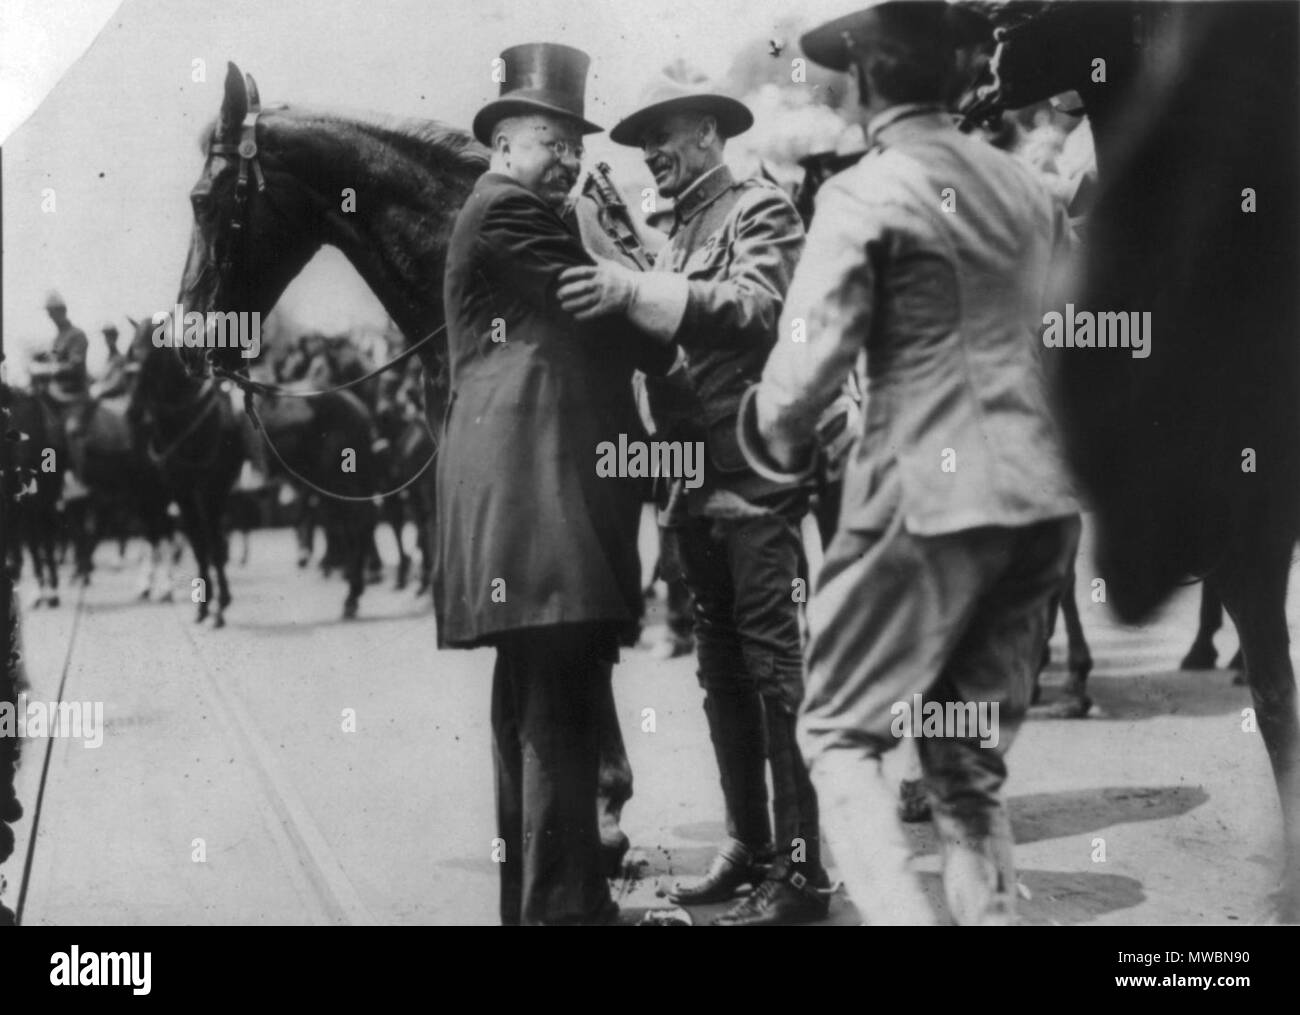 . English: Photograph showing Theodore Roosevelt and Col. Alexander O. Brodie, in uniform, greeting each other, surrounded by horses. circa 1910 June 23. Paul Thompson (photographer) 253 Greeting Col. Brodie of Rough Riders Stock Photo